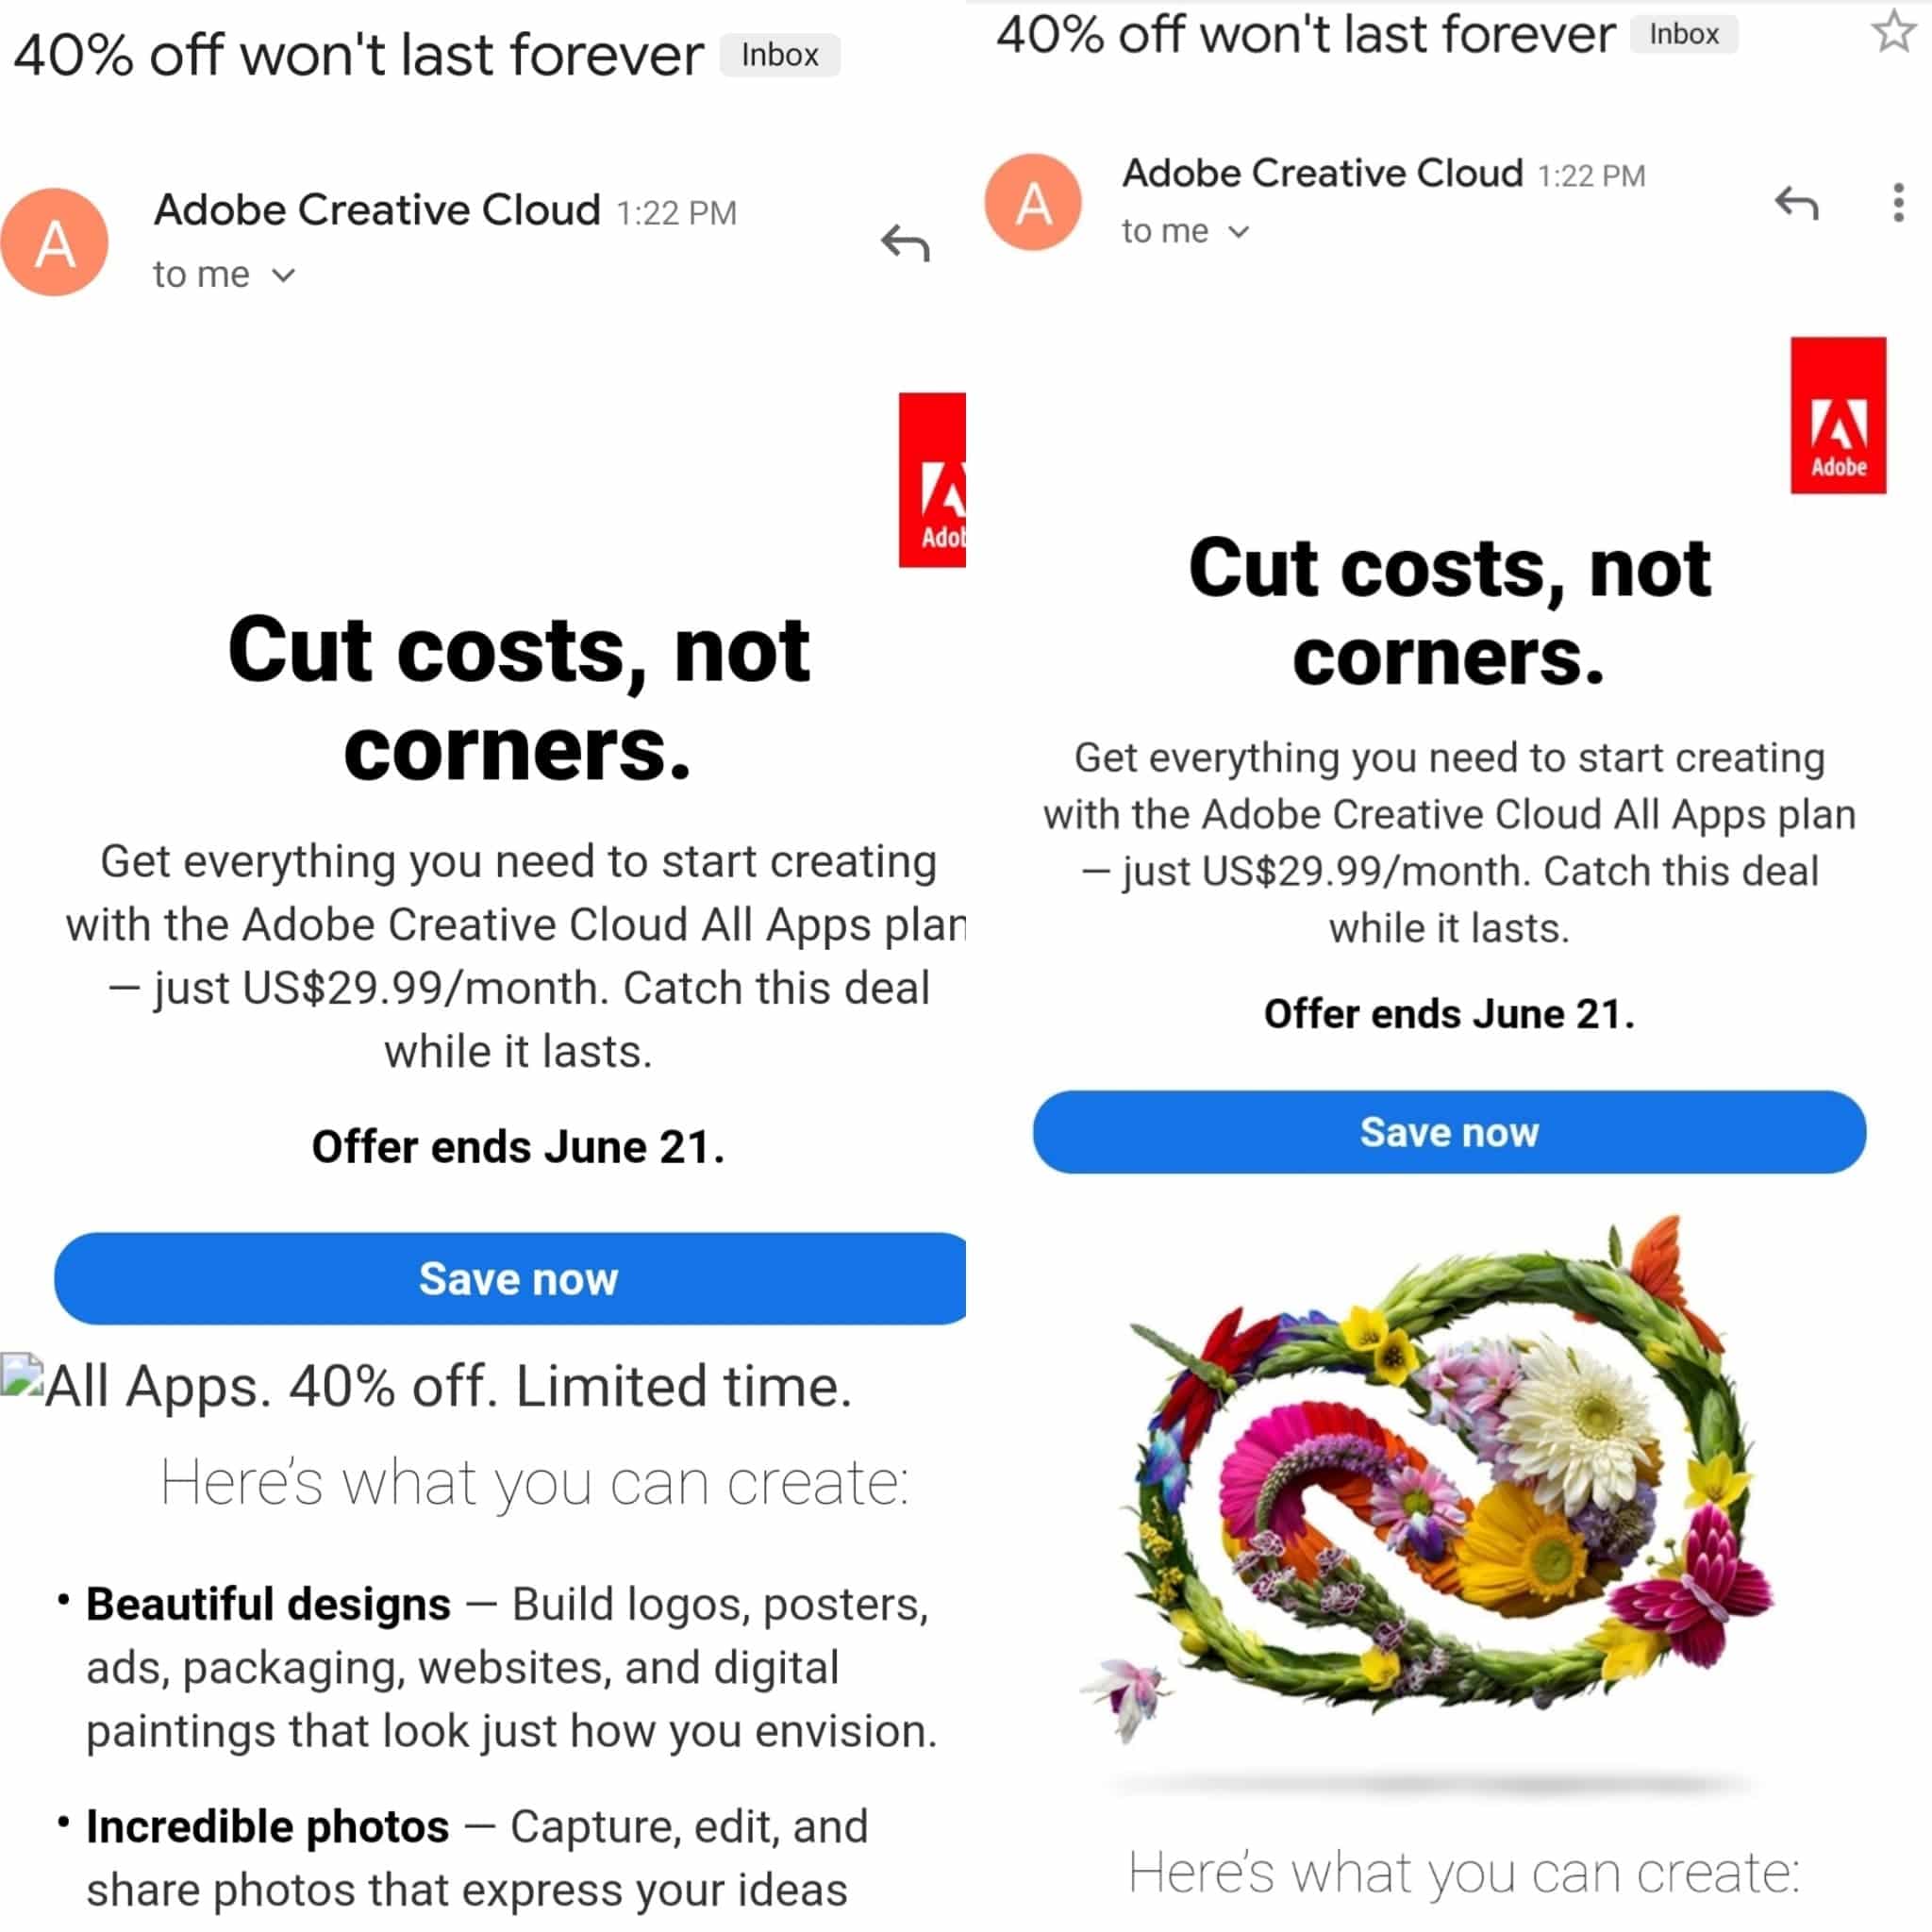 In this example by Adobe, the first email shows a broken image, which is indicated by the small square with the tear in it next to the “all apps” text. 